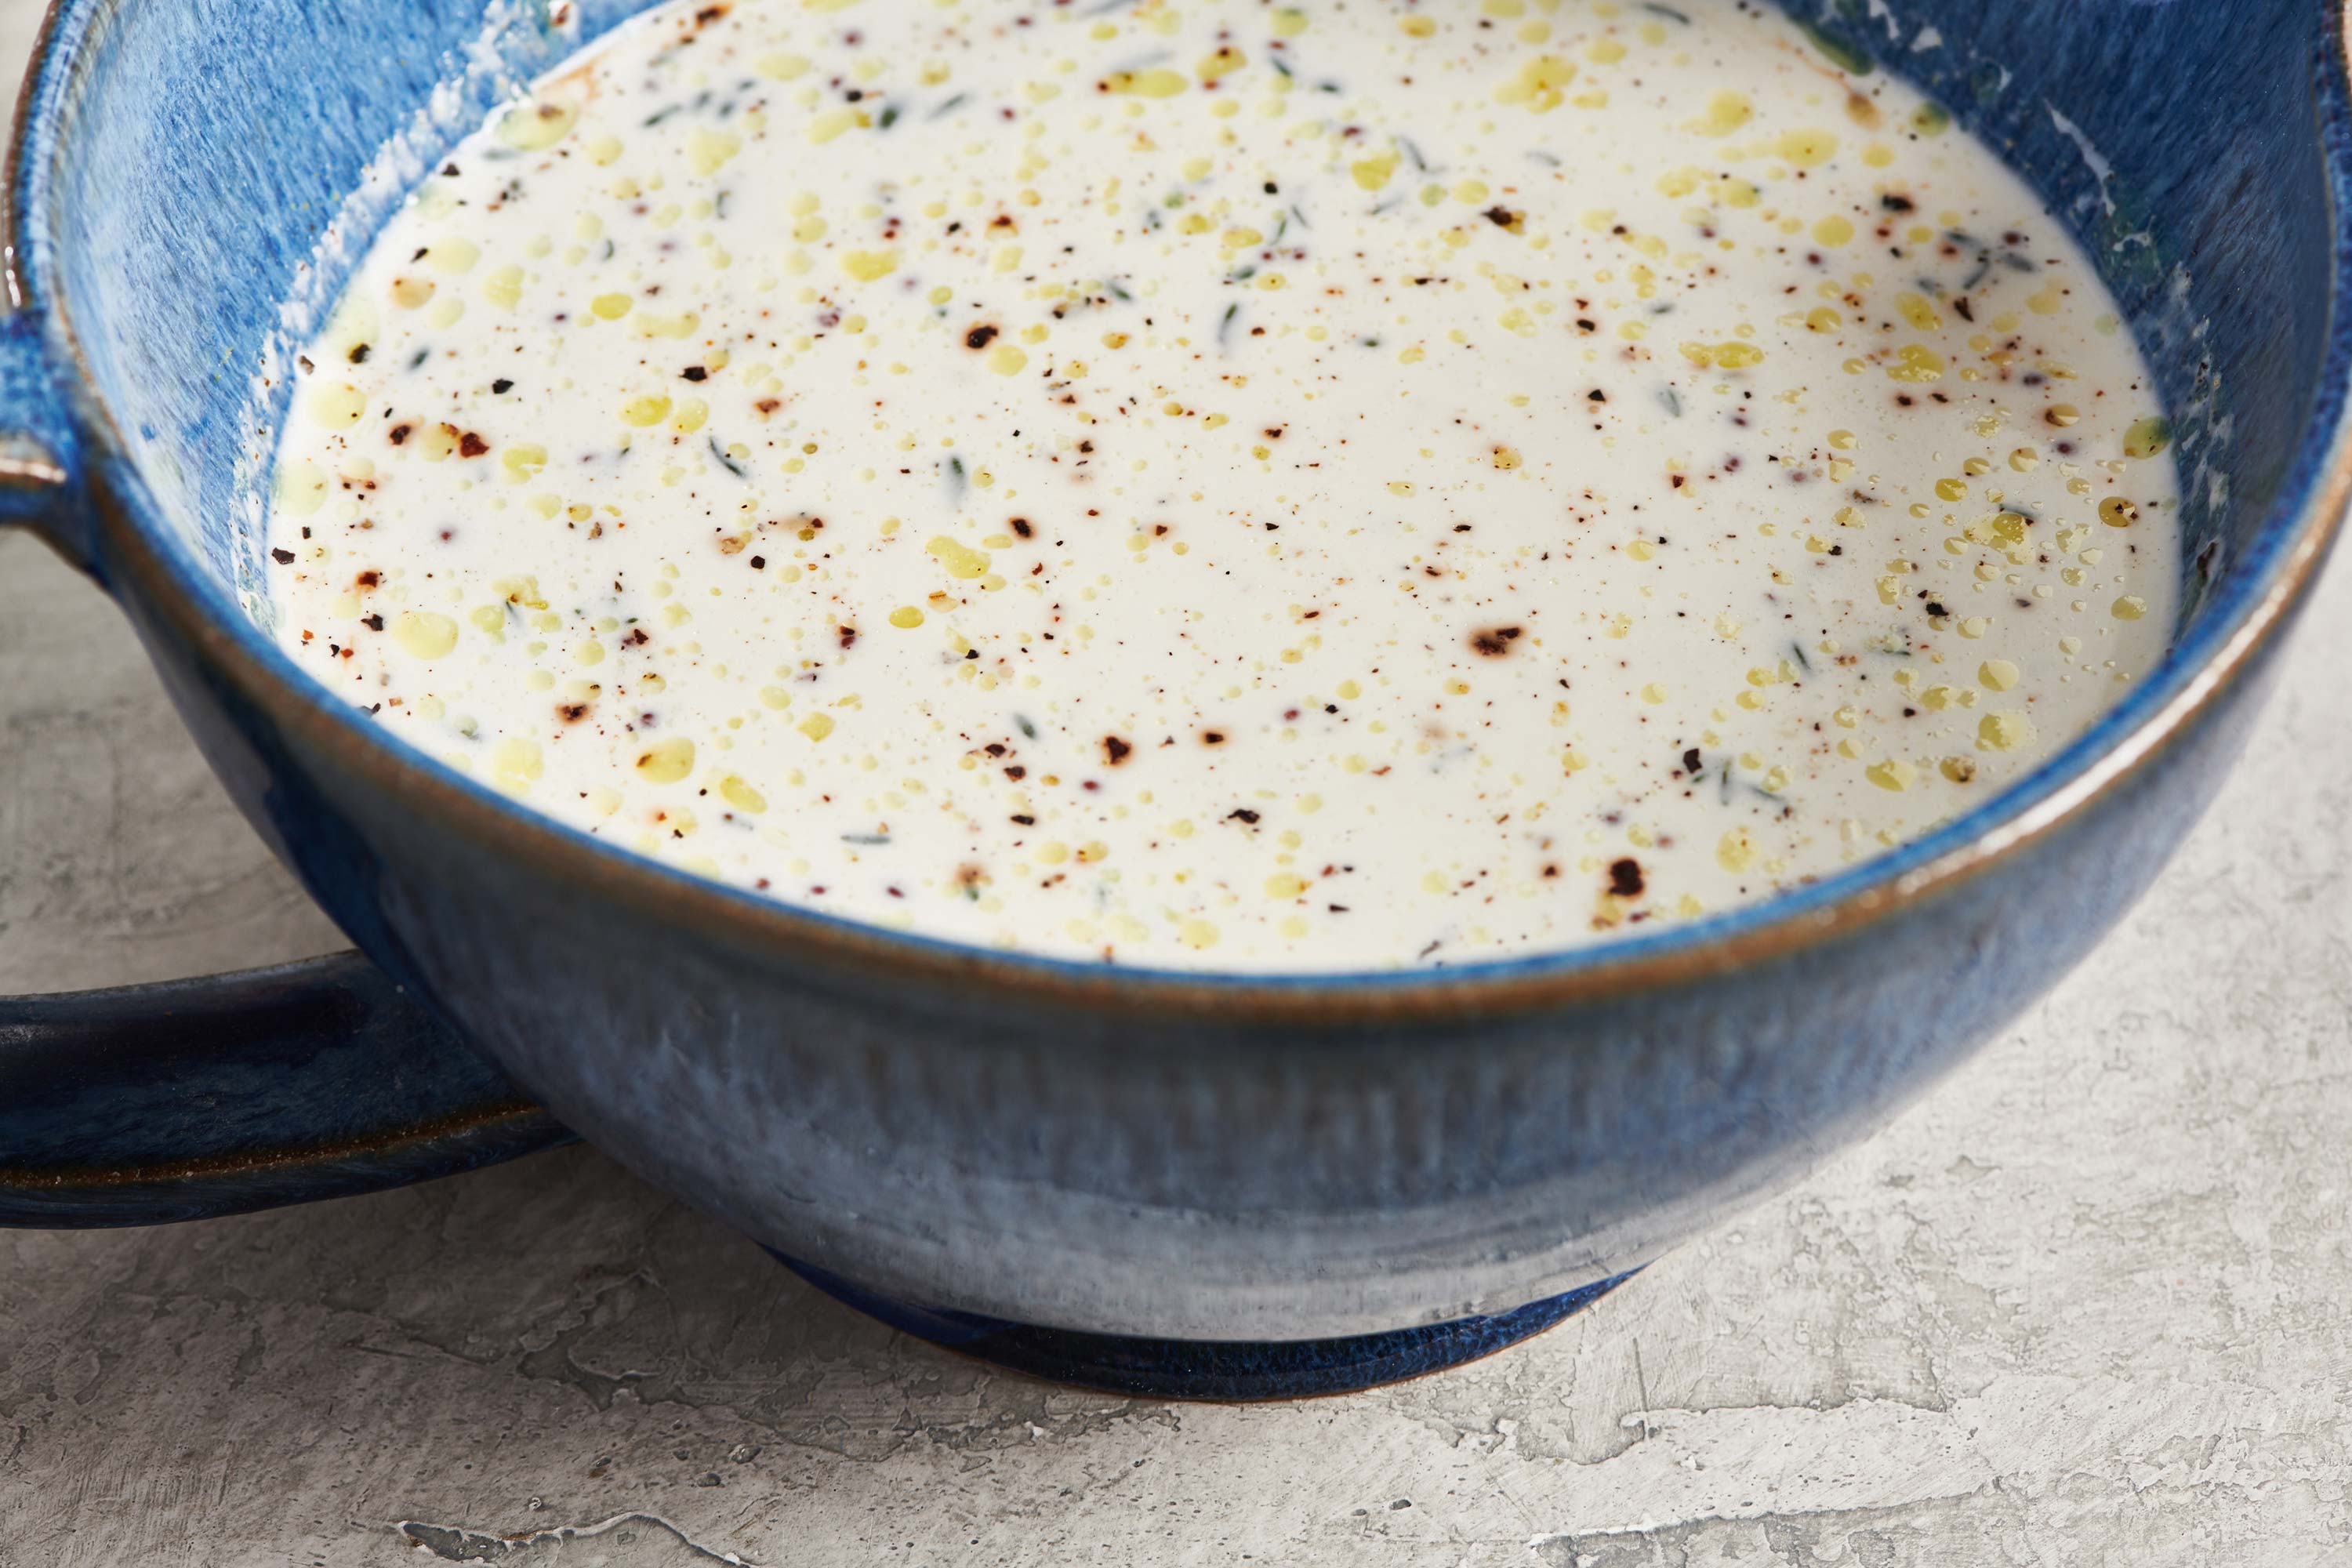 Speckled broth and cream mixture in a blue bowl.